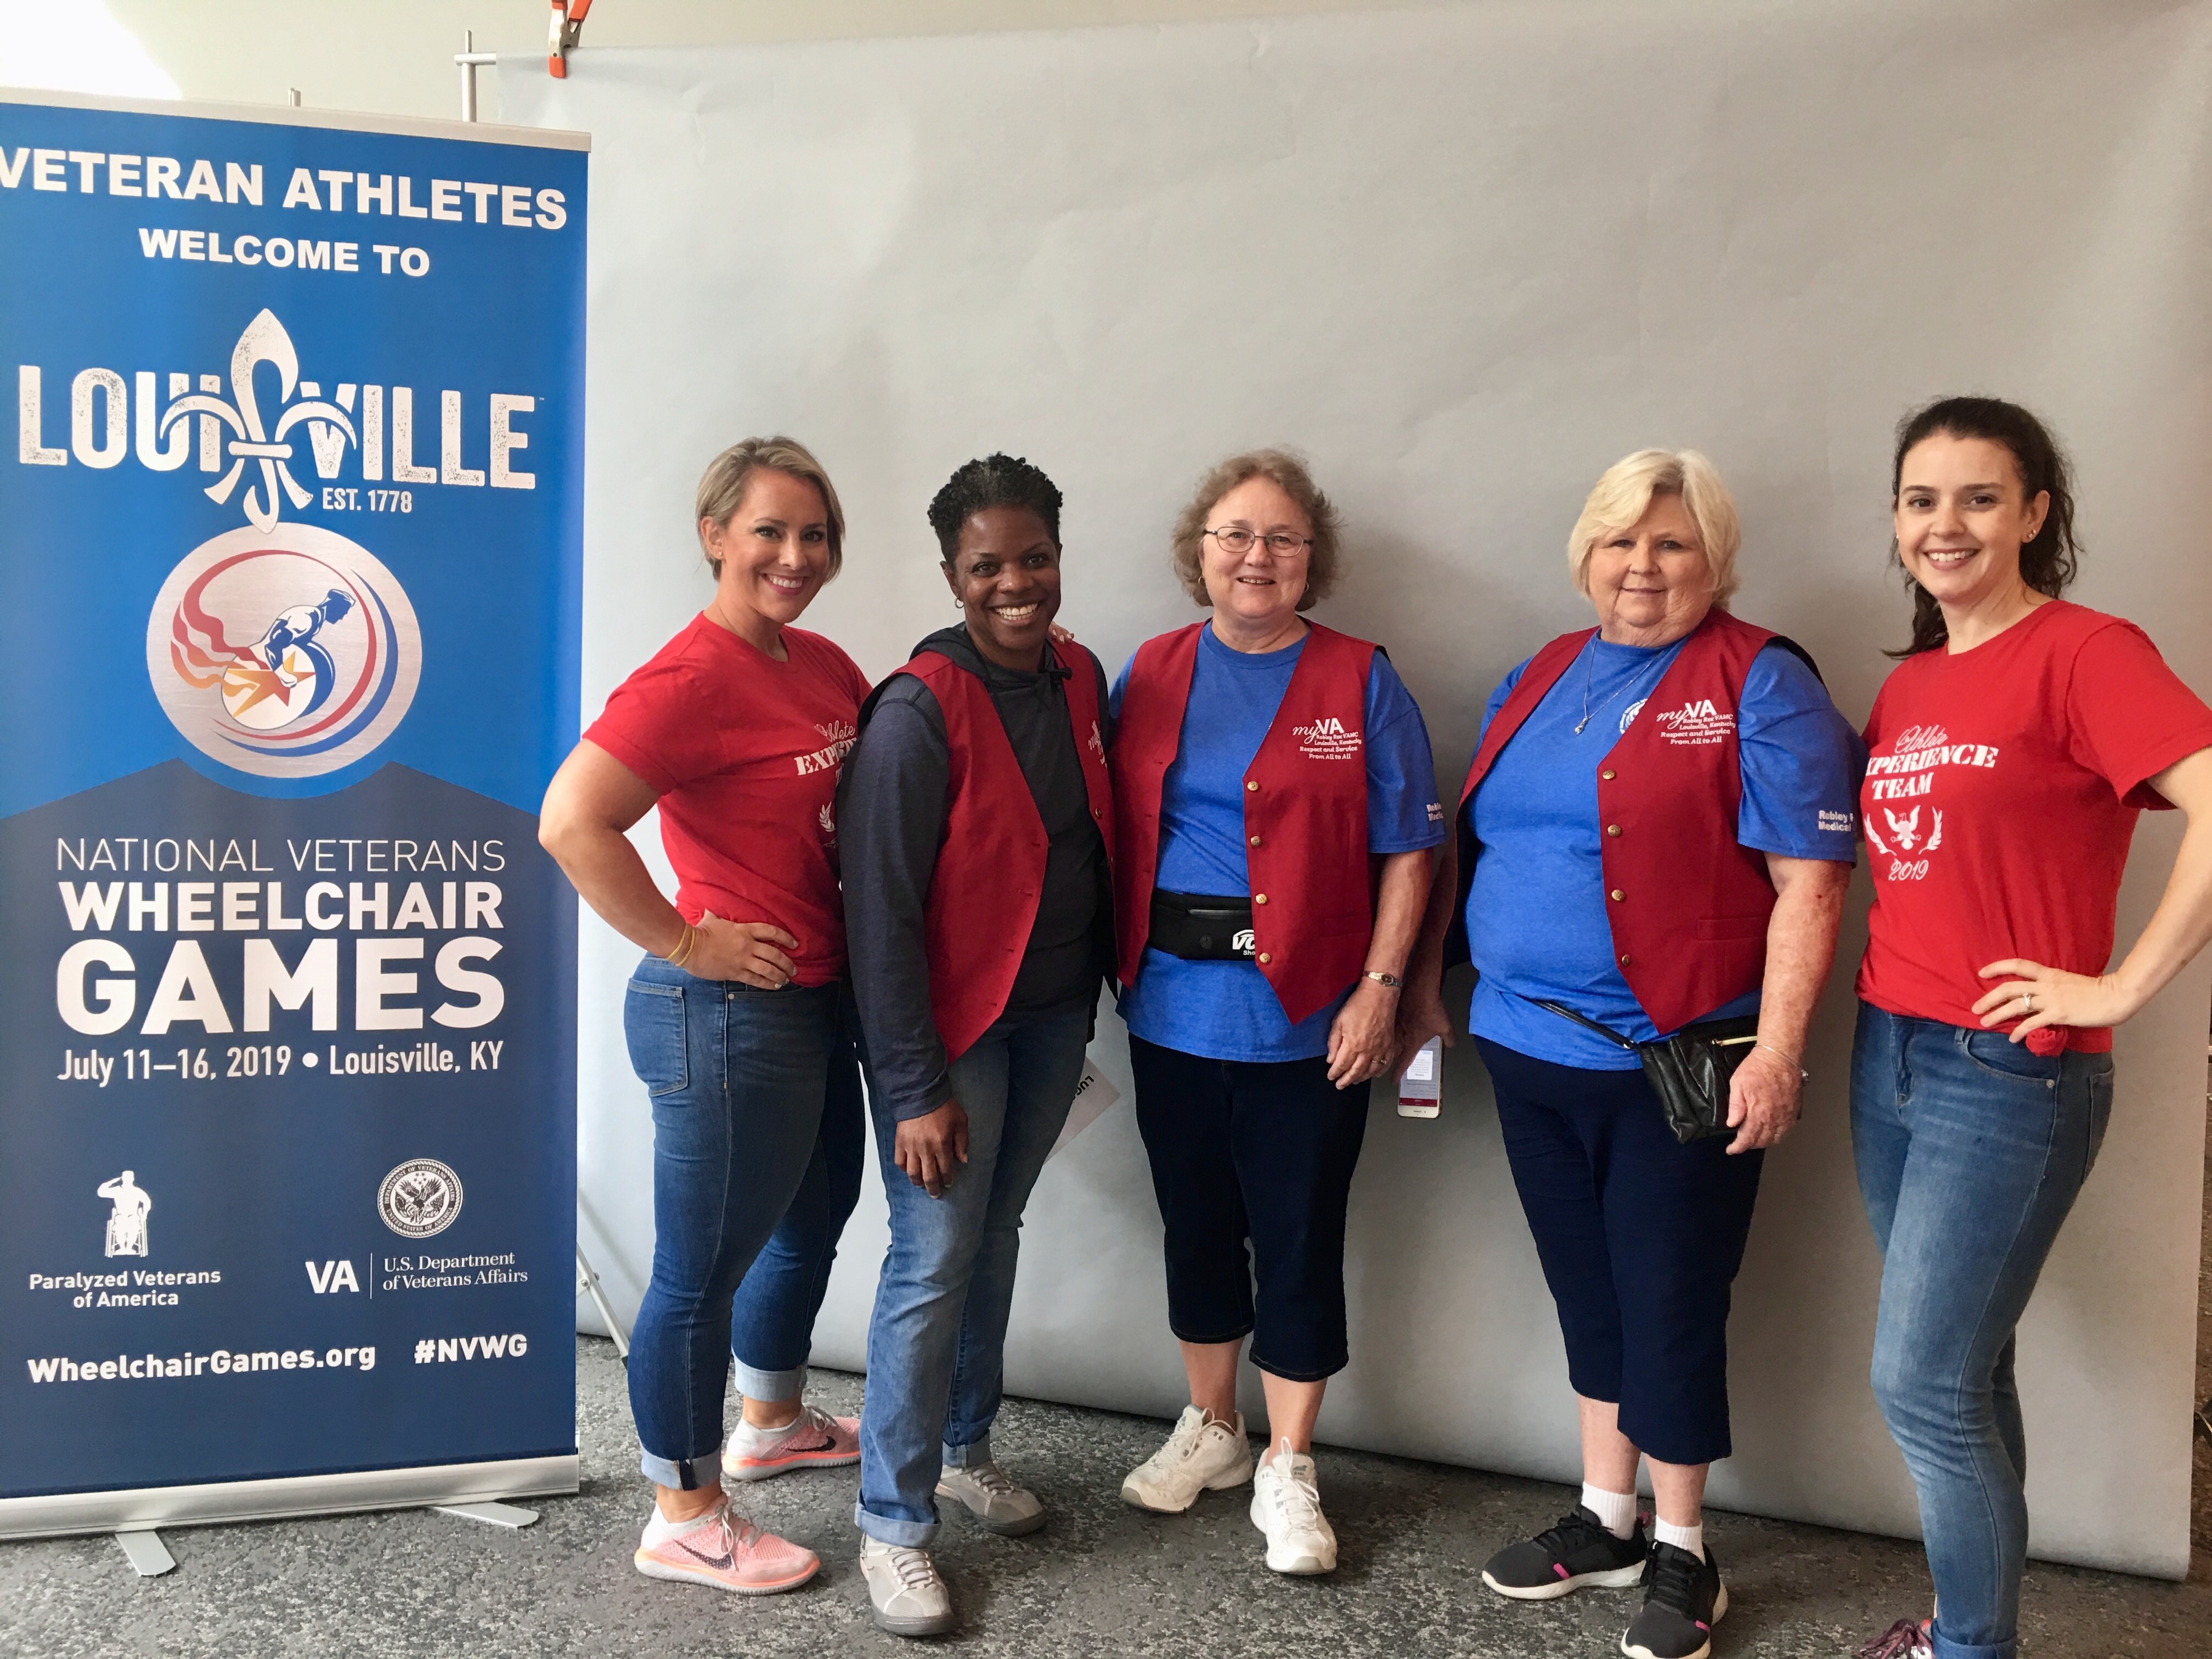 Some of the Red Coat Ambassadors and Athlete Experience Team from the Robley Rex VA that assisted Veterans and their families at the wheelchair games.